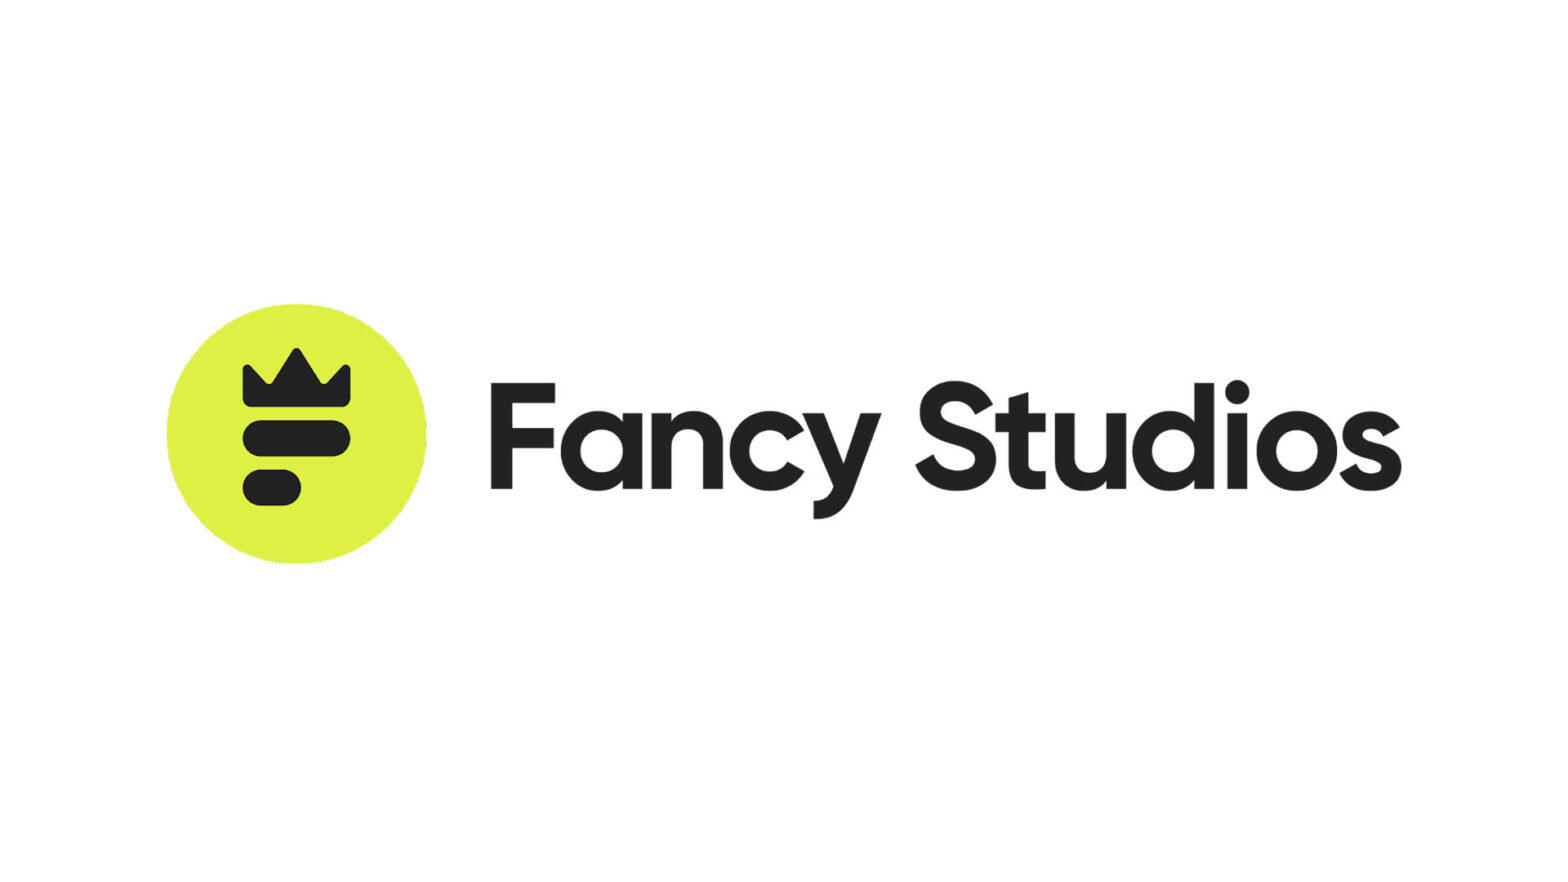 Fancy Studios presents the future of gaming